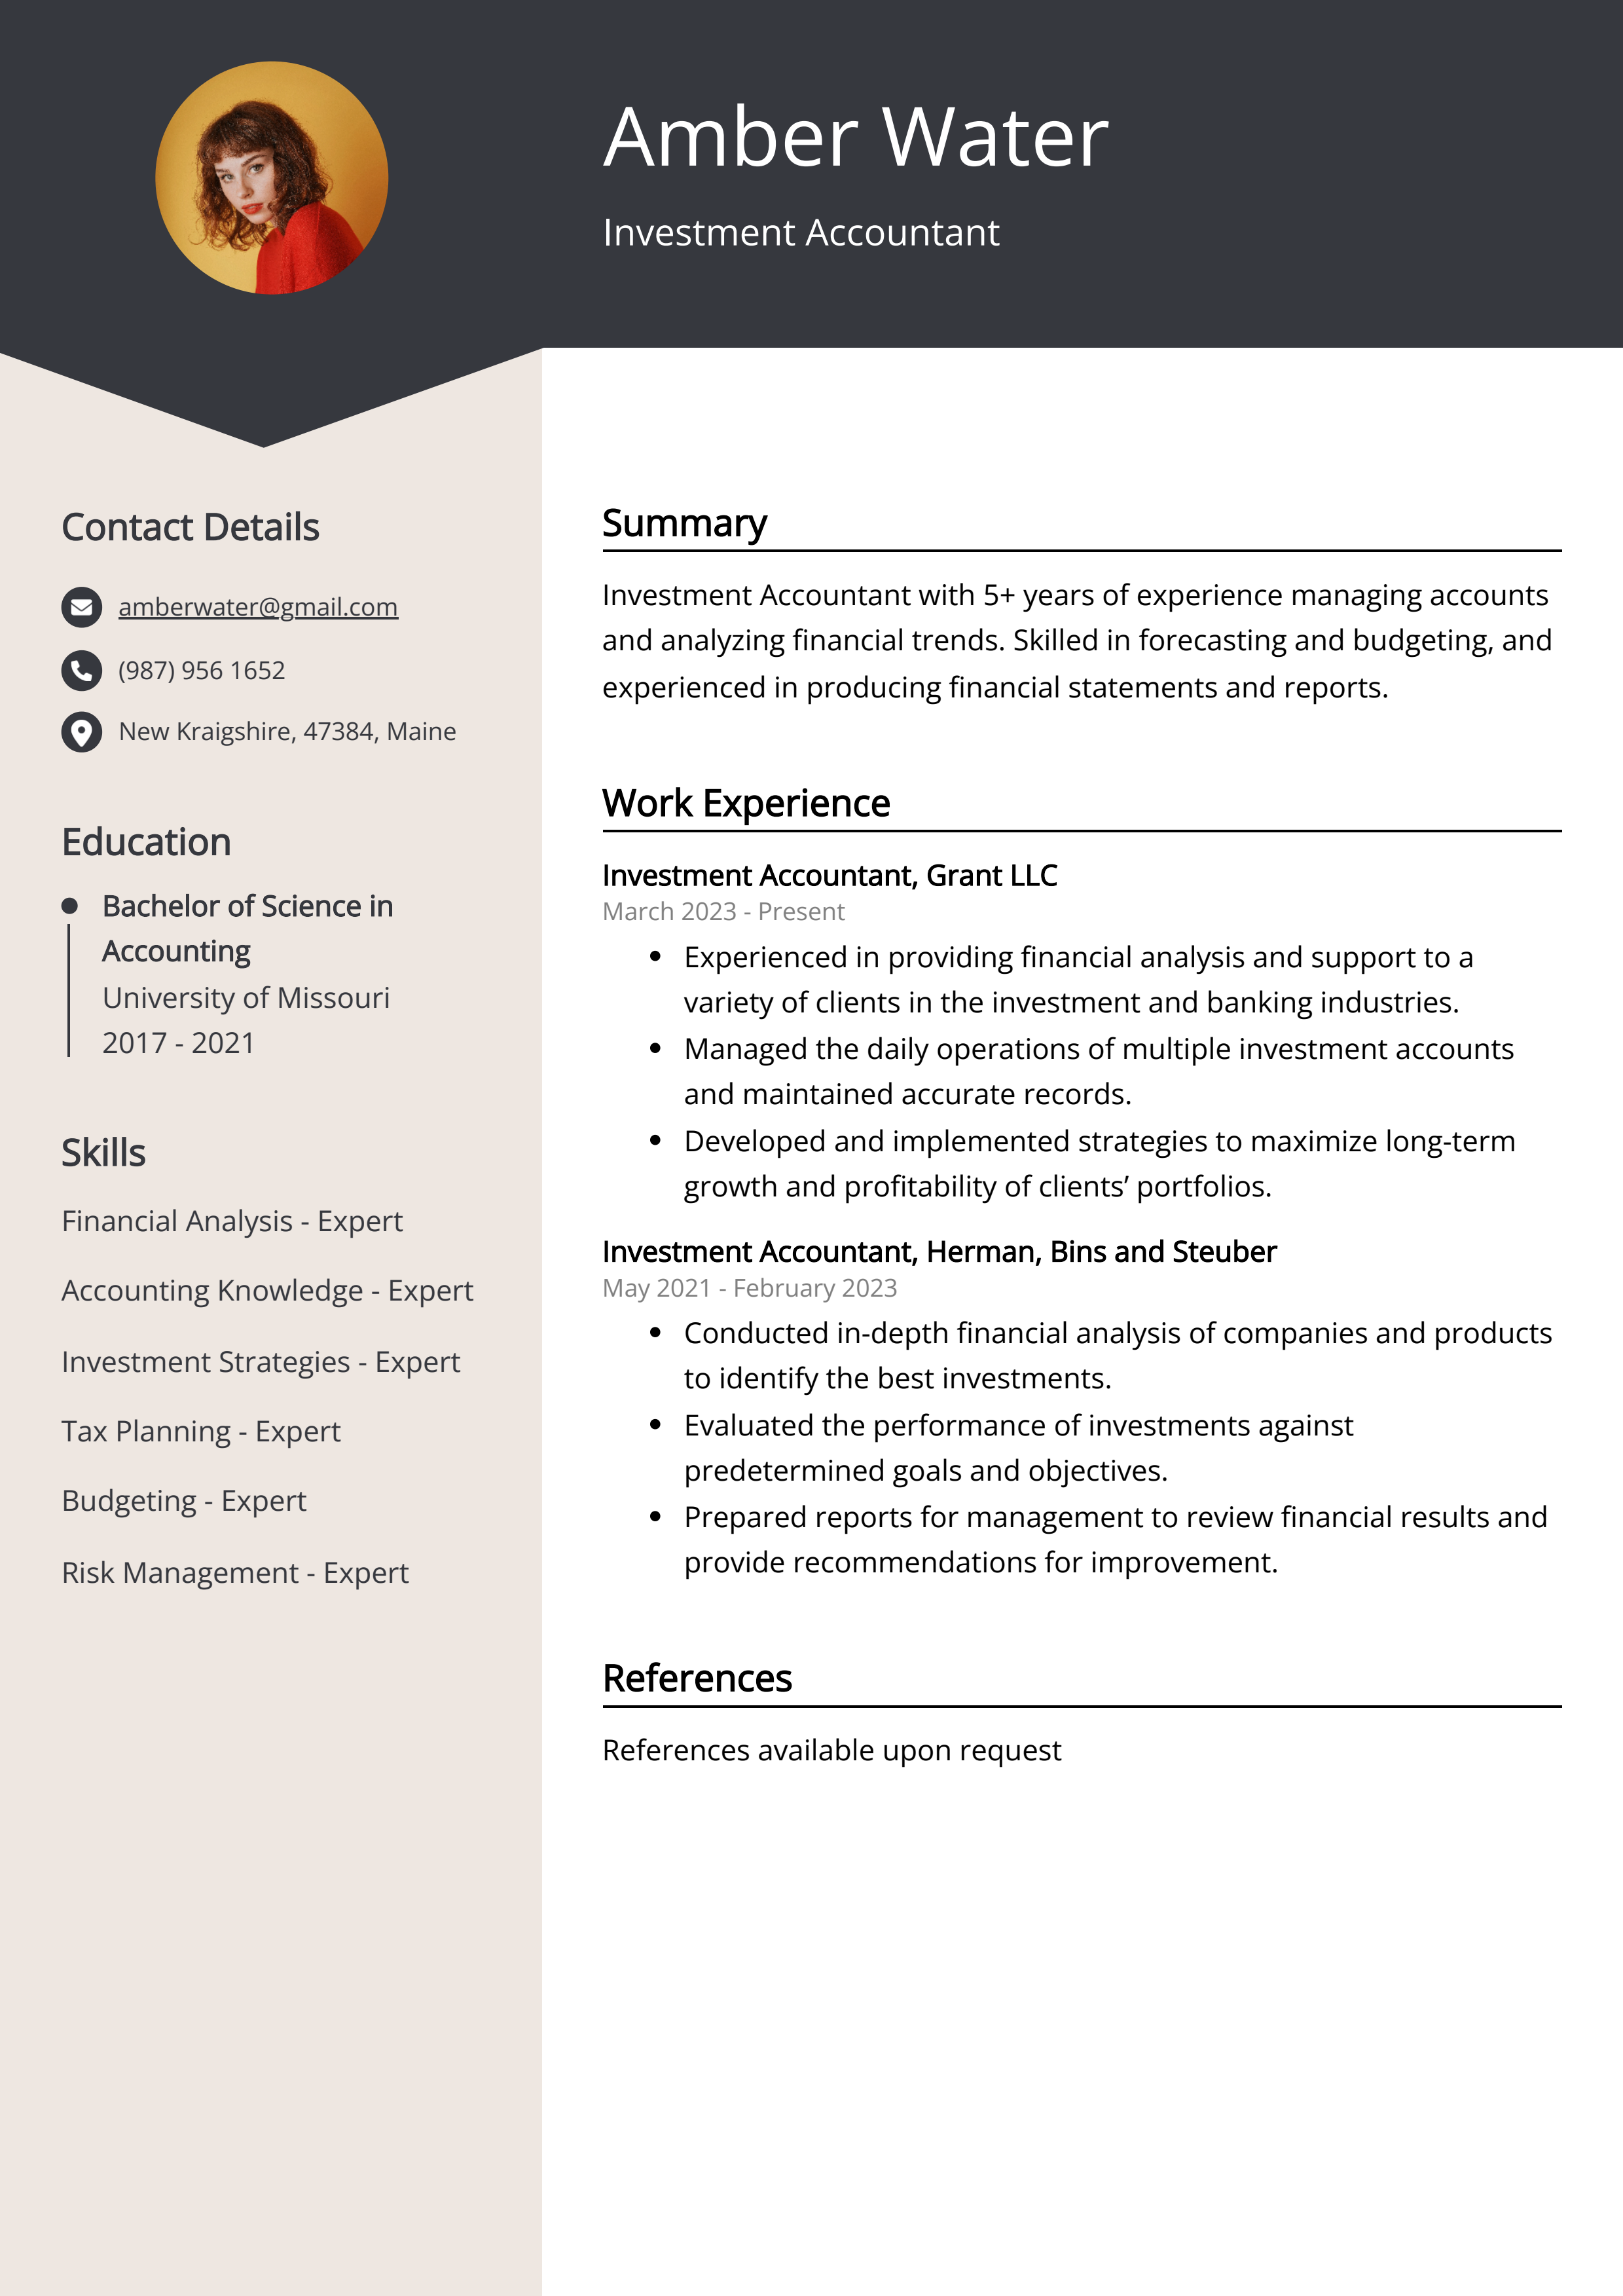 Investment Accountant CV Example